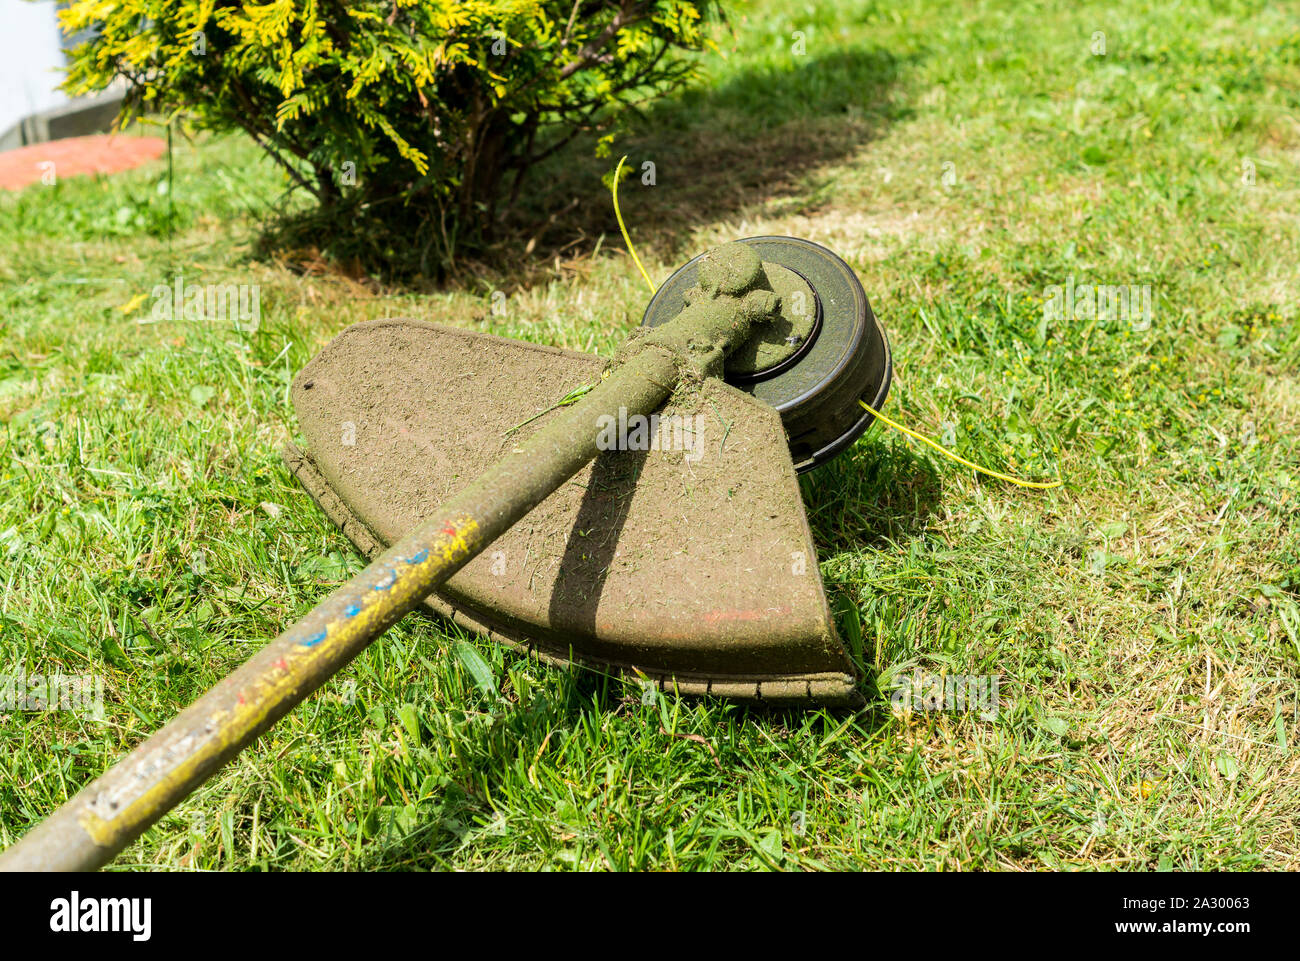 brushcutter meadow tool Stock Photo